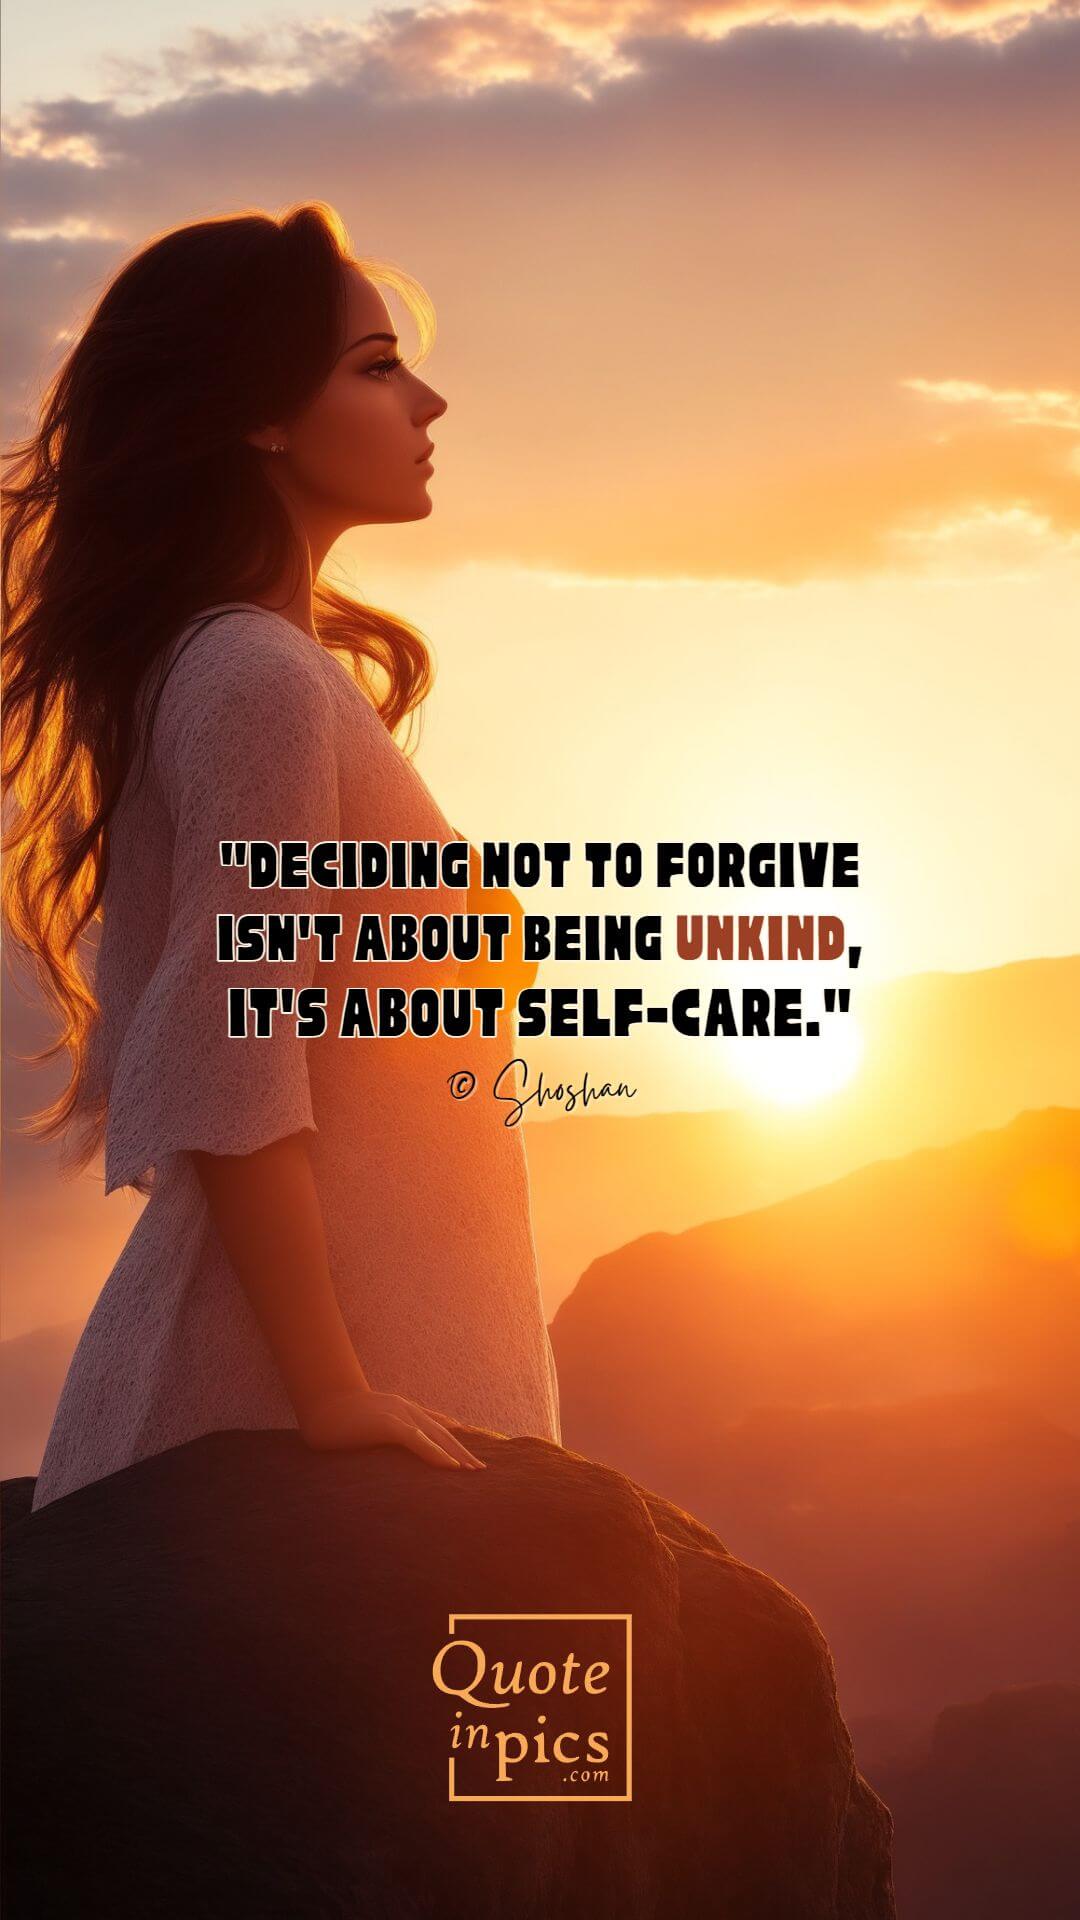 Deciding not to forgive isn't about being unkind, it's about self-care. © Shoshan